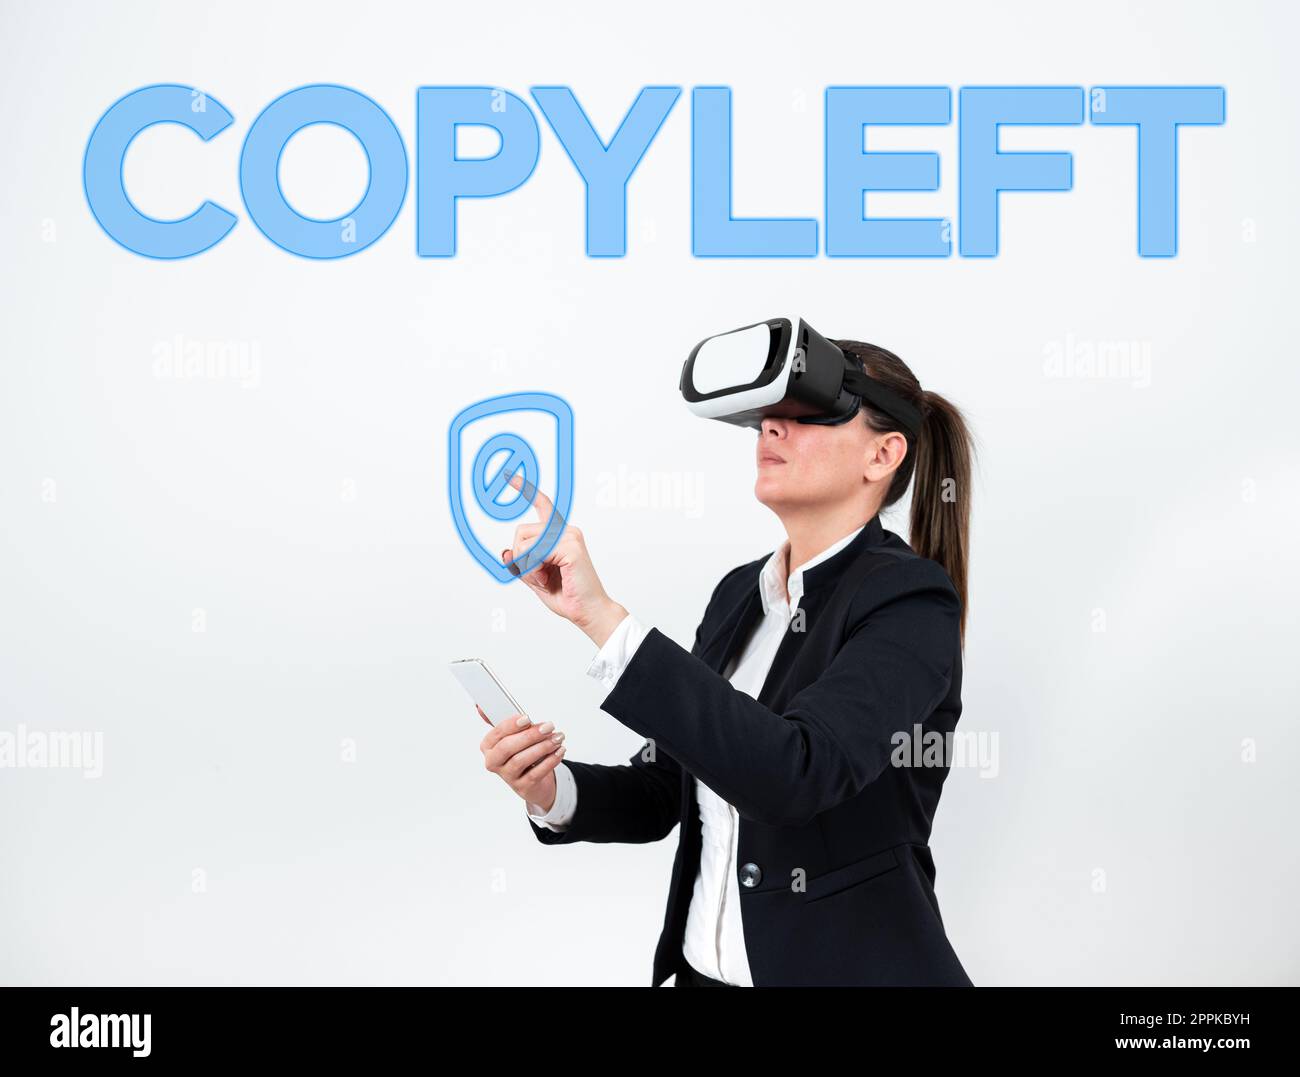 Sign displaying Copyleft. Concept meaning the right to freely use, modify, copy, and share software, works of art Stock Photo